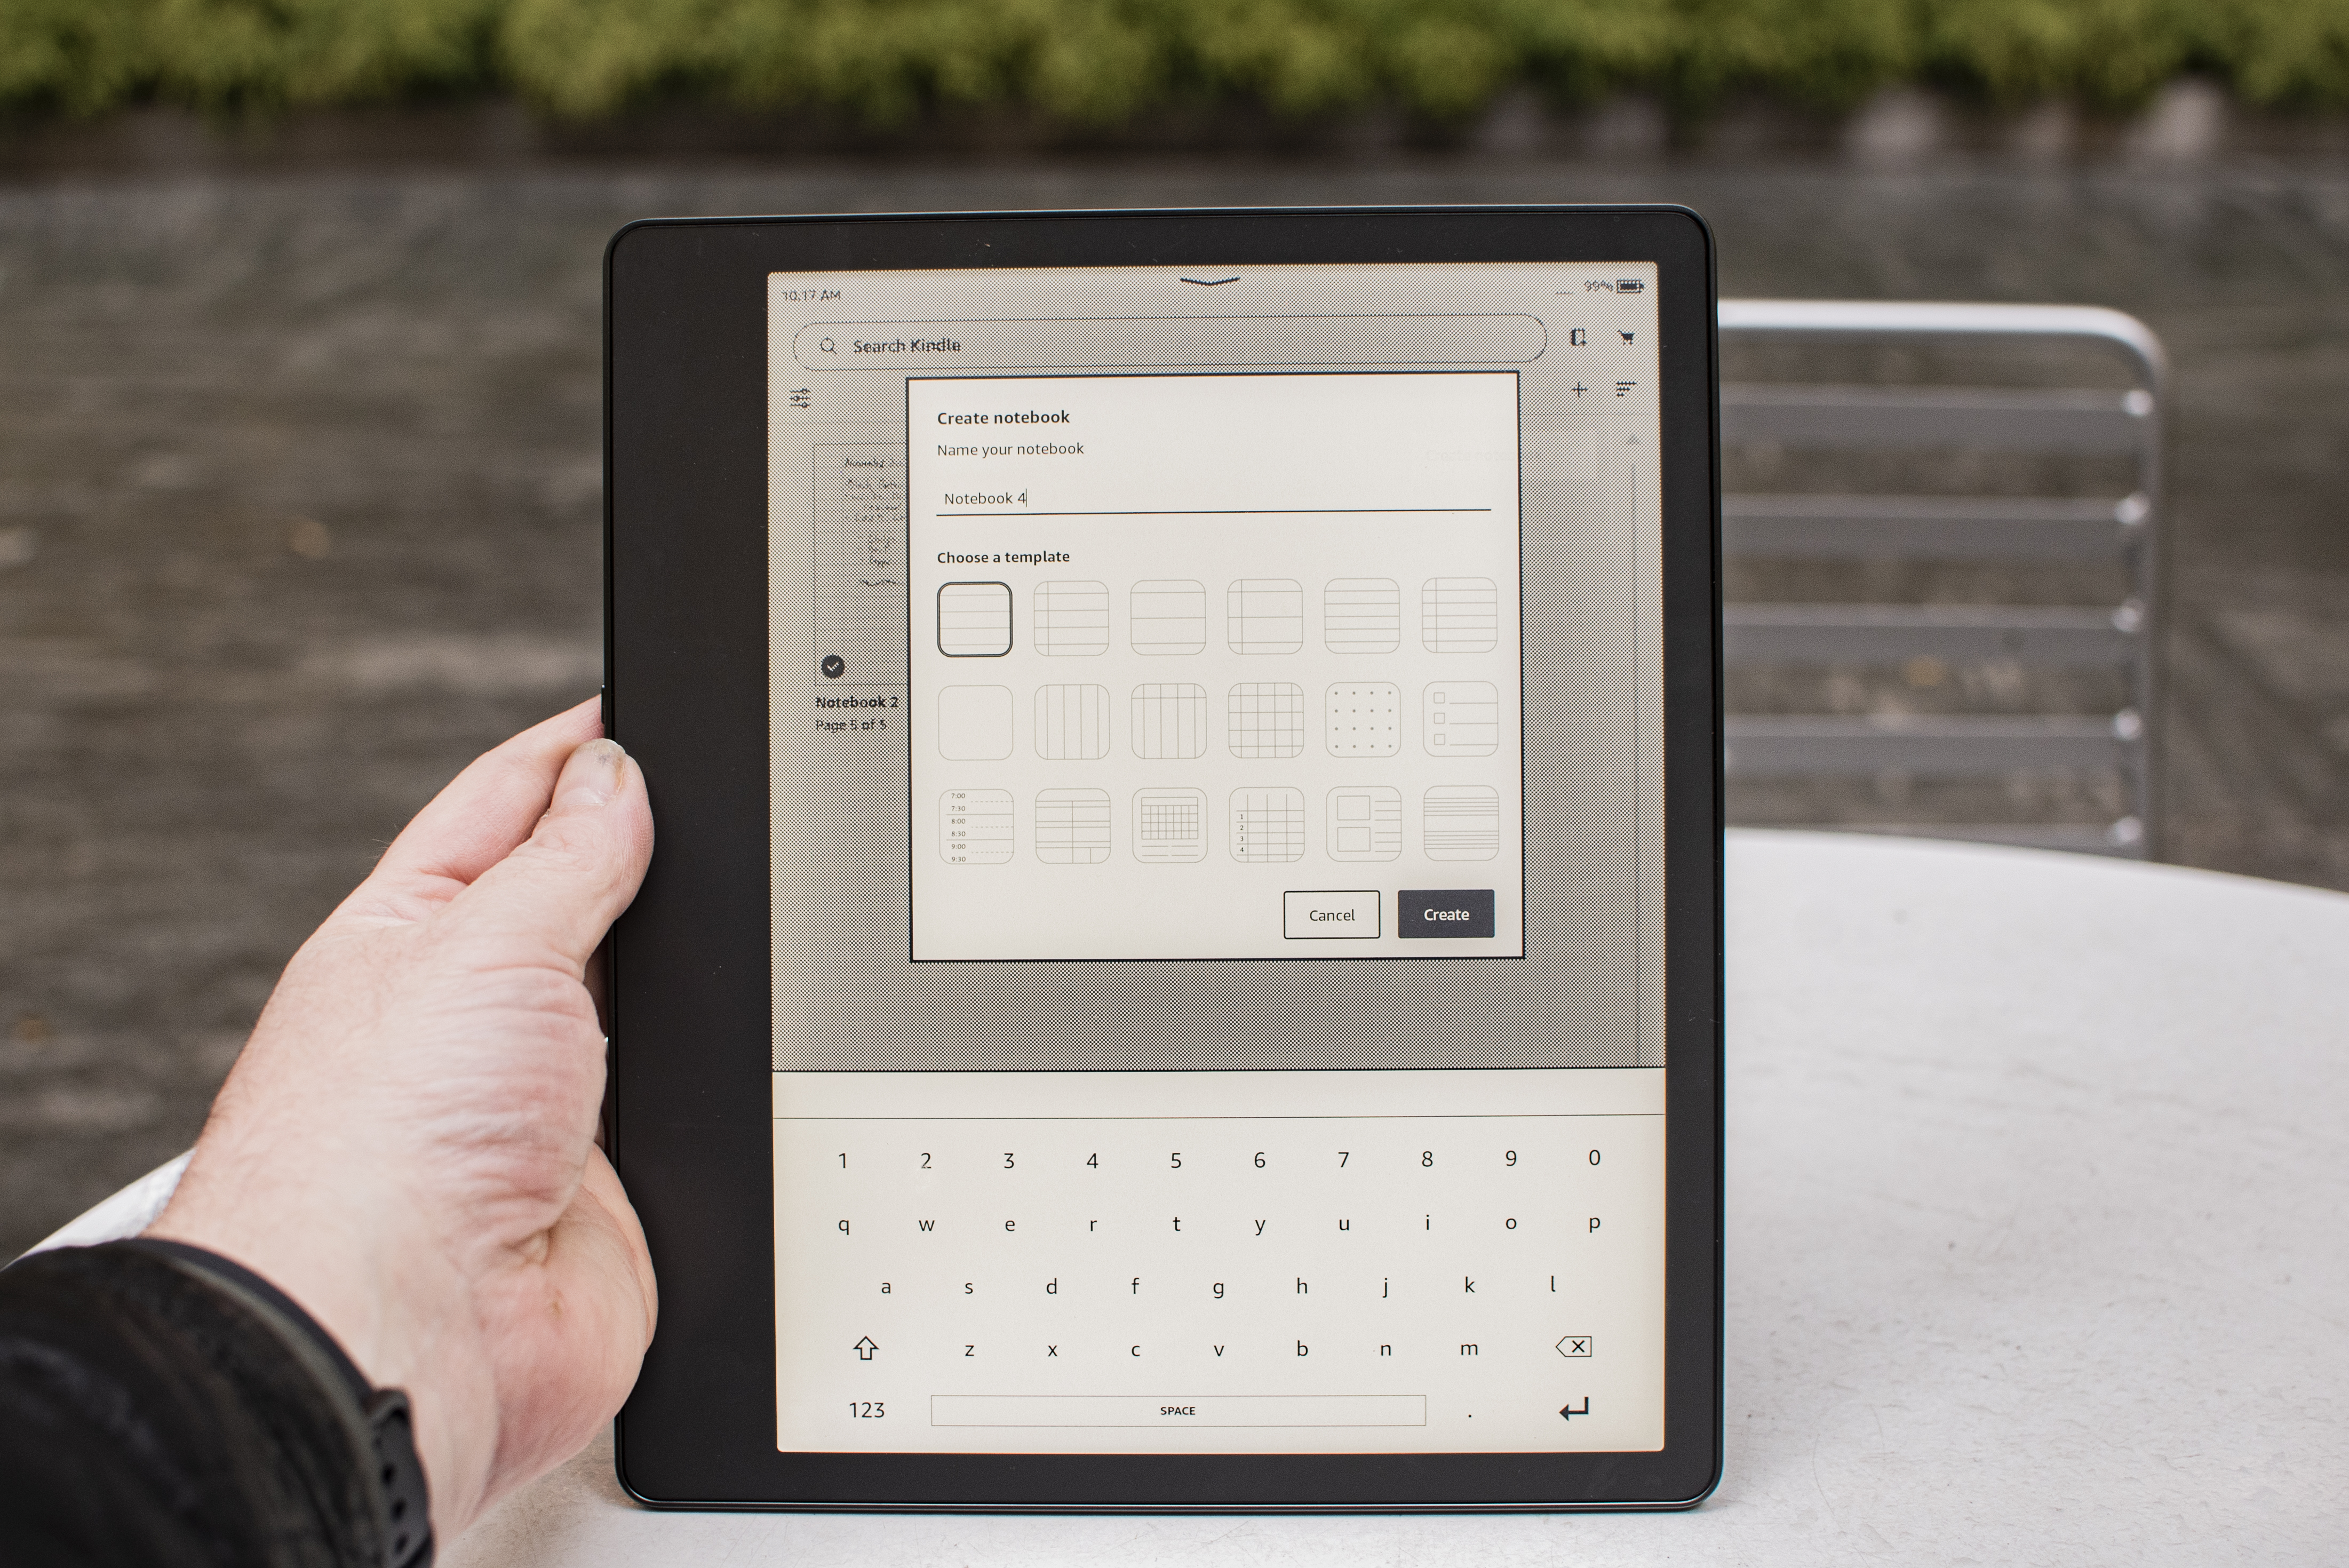 Kindle Scribe Review: Off to a Good Start - TheStreet